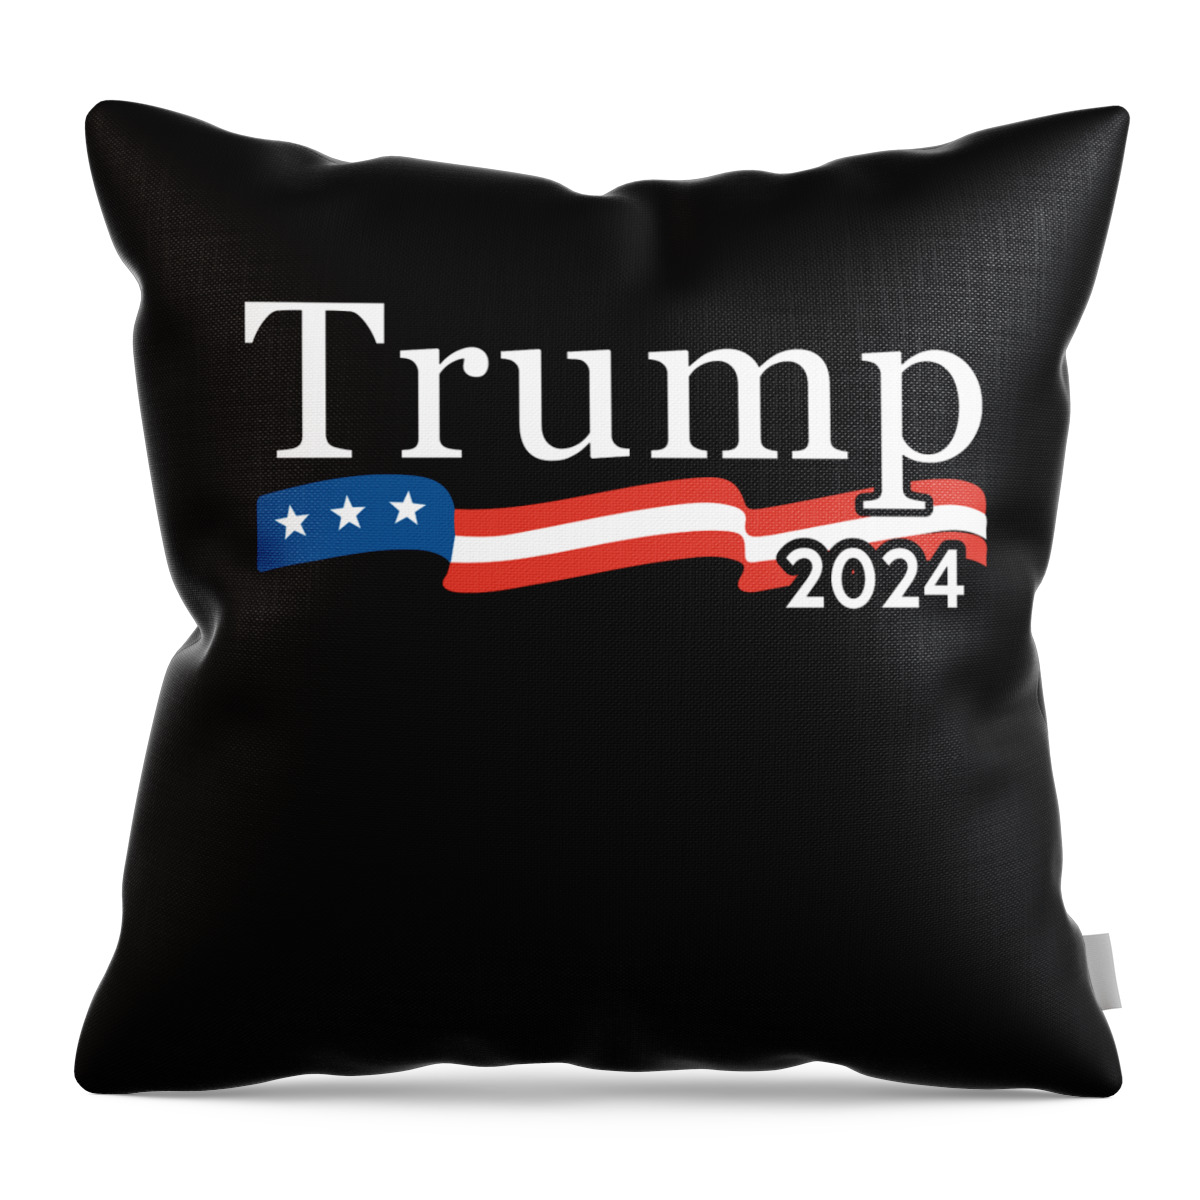 Cool Throw Pillow featuring the digital art Trump 2024 For President by Flippin Sweet Gear